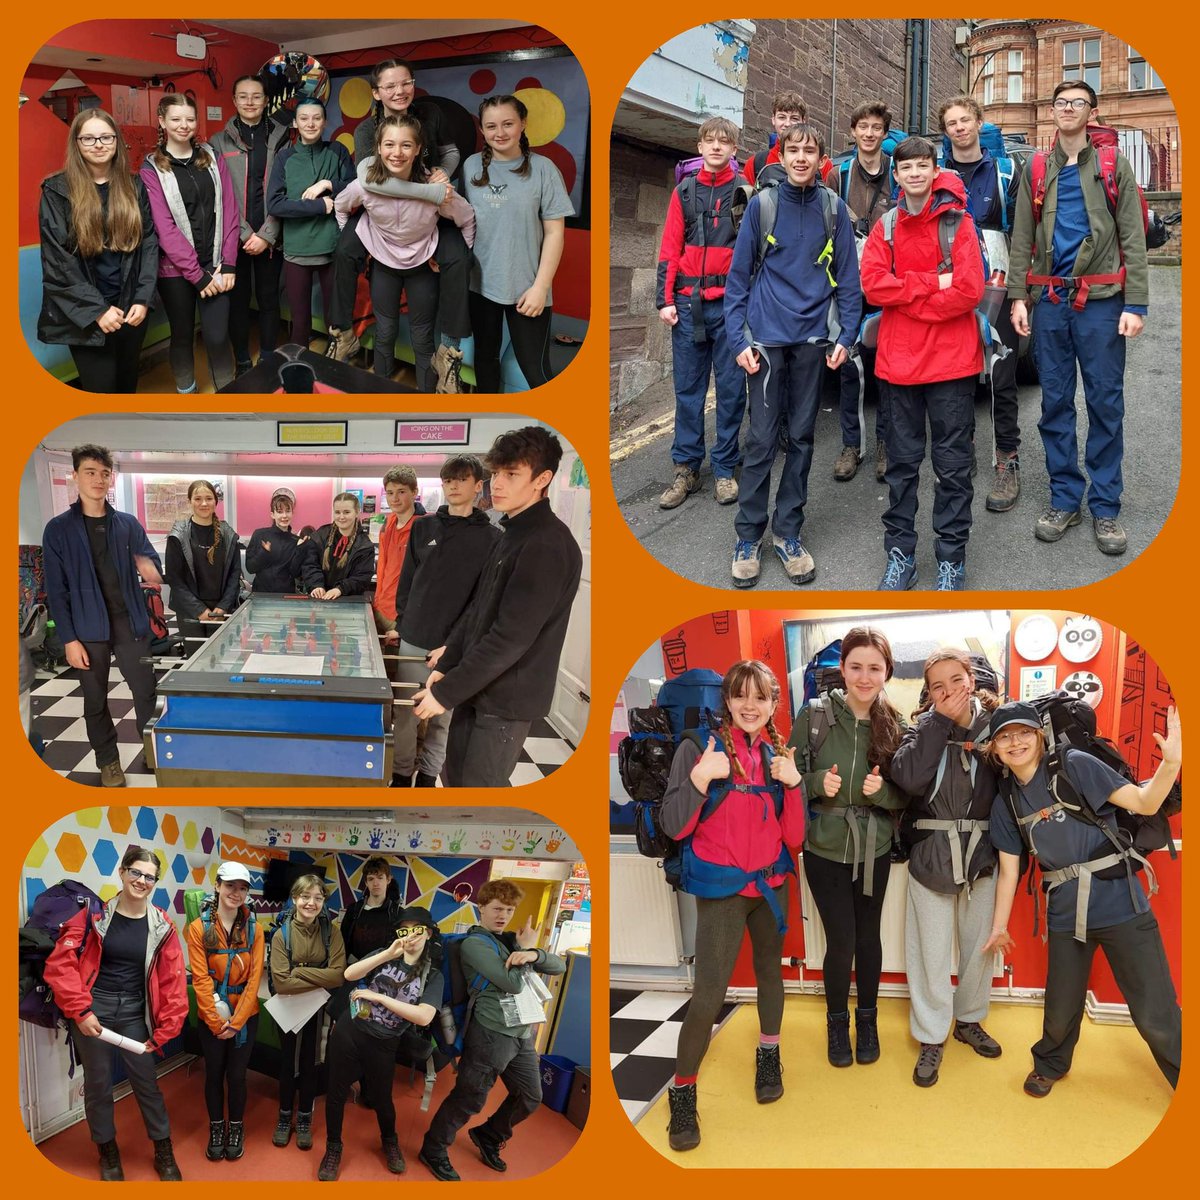 The Logos Crieff Bronze DofE groups set off this morning to complete their Qualifying Expedition! Huge thanks to the volunteer leaders who give up their time & energy to make this happen. #YouthWithoutLimits #amazingvolunteers @CrieffHigh @DofEScotland @DofePkc @GannochyTrust